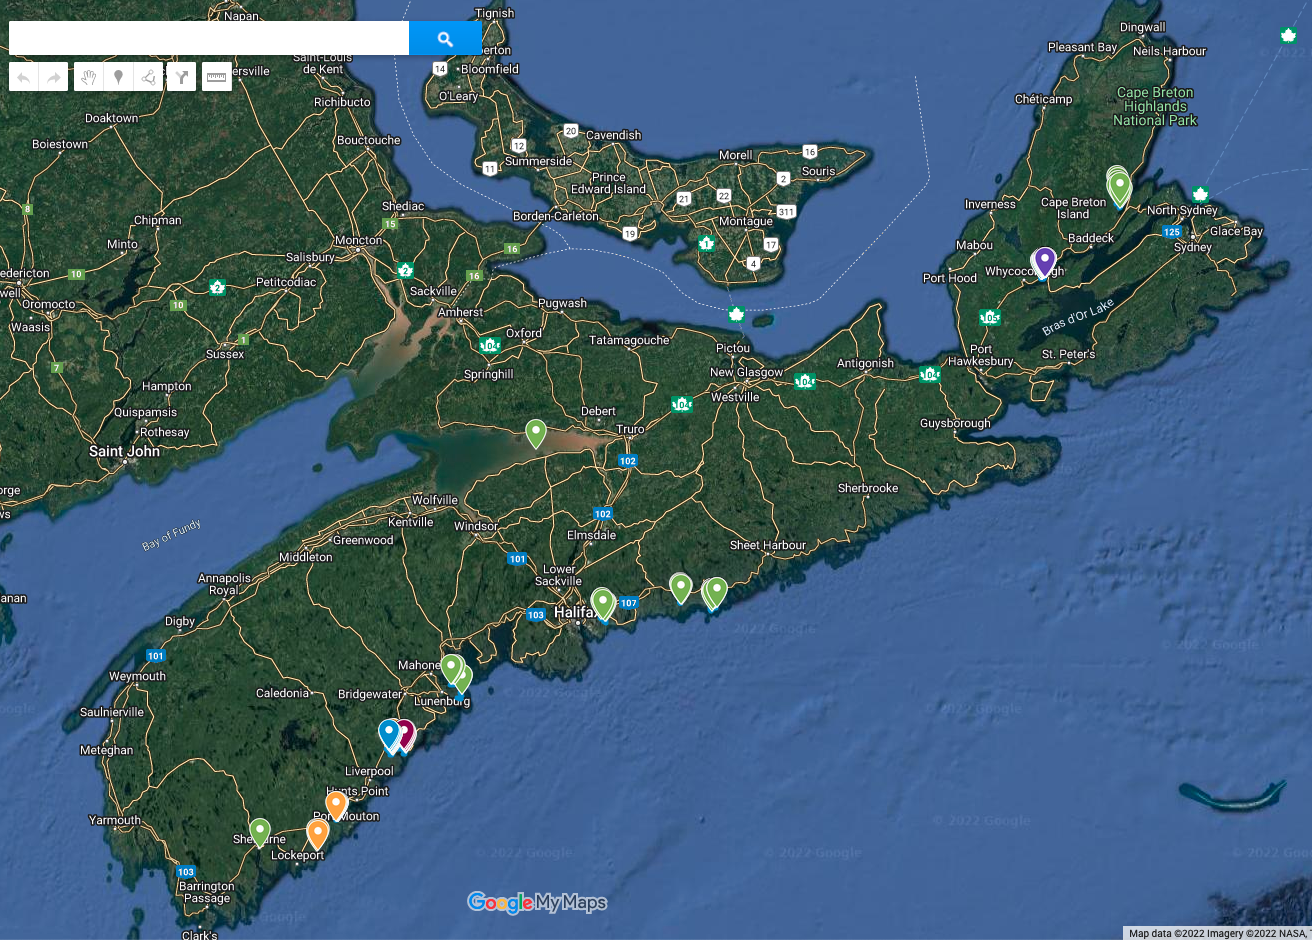 A map of Nova Scotia shows markers at a variety of locations throughout the province